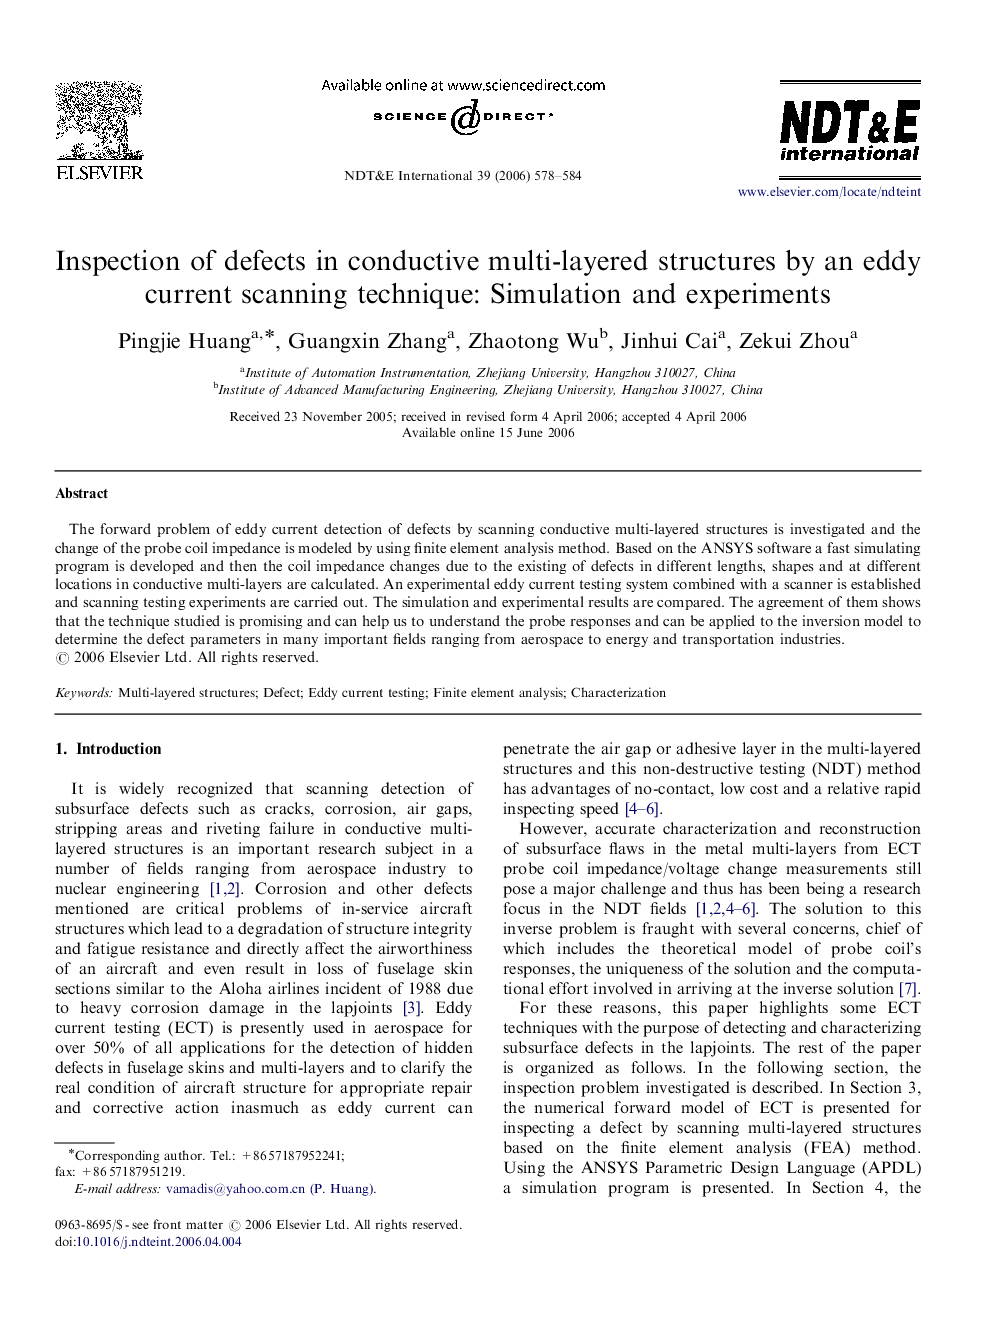 Inspection of defects in conductive multi-layered structures by an eddy current scanning technique: Simulation and experiments